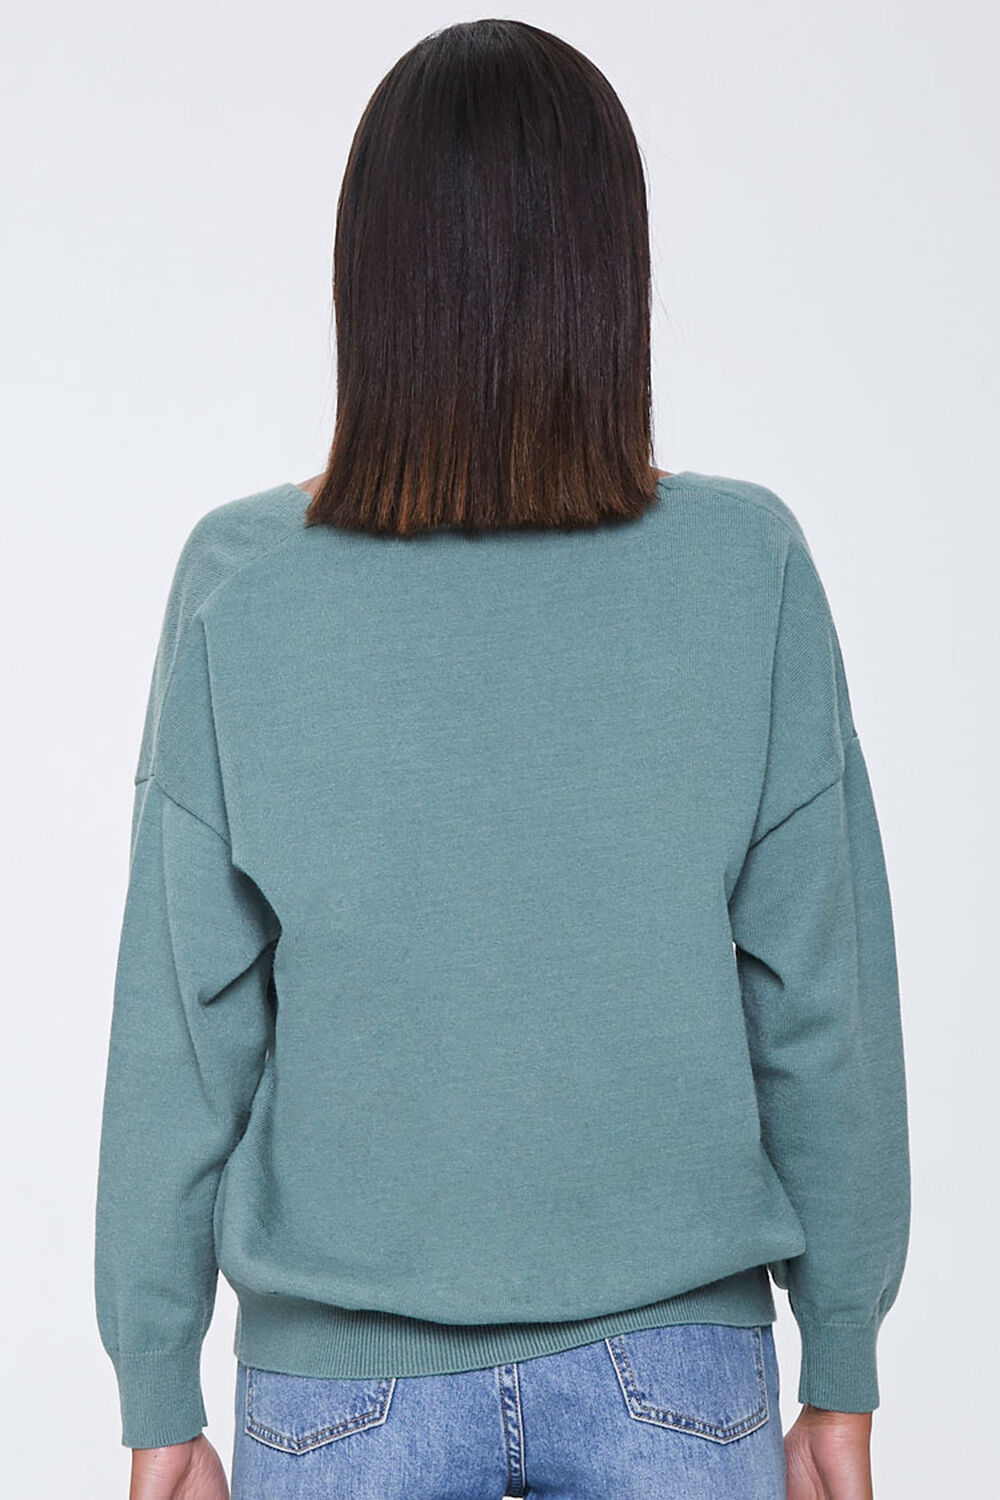 SEA GREEN Ribbed Button-Front Cardigan, image 3